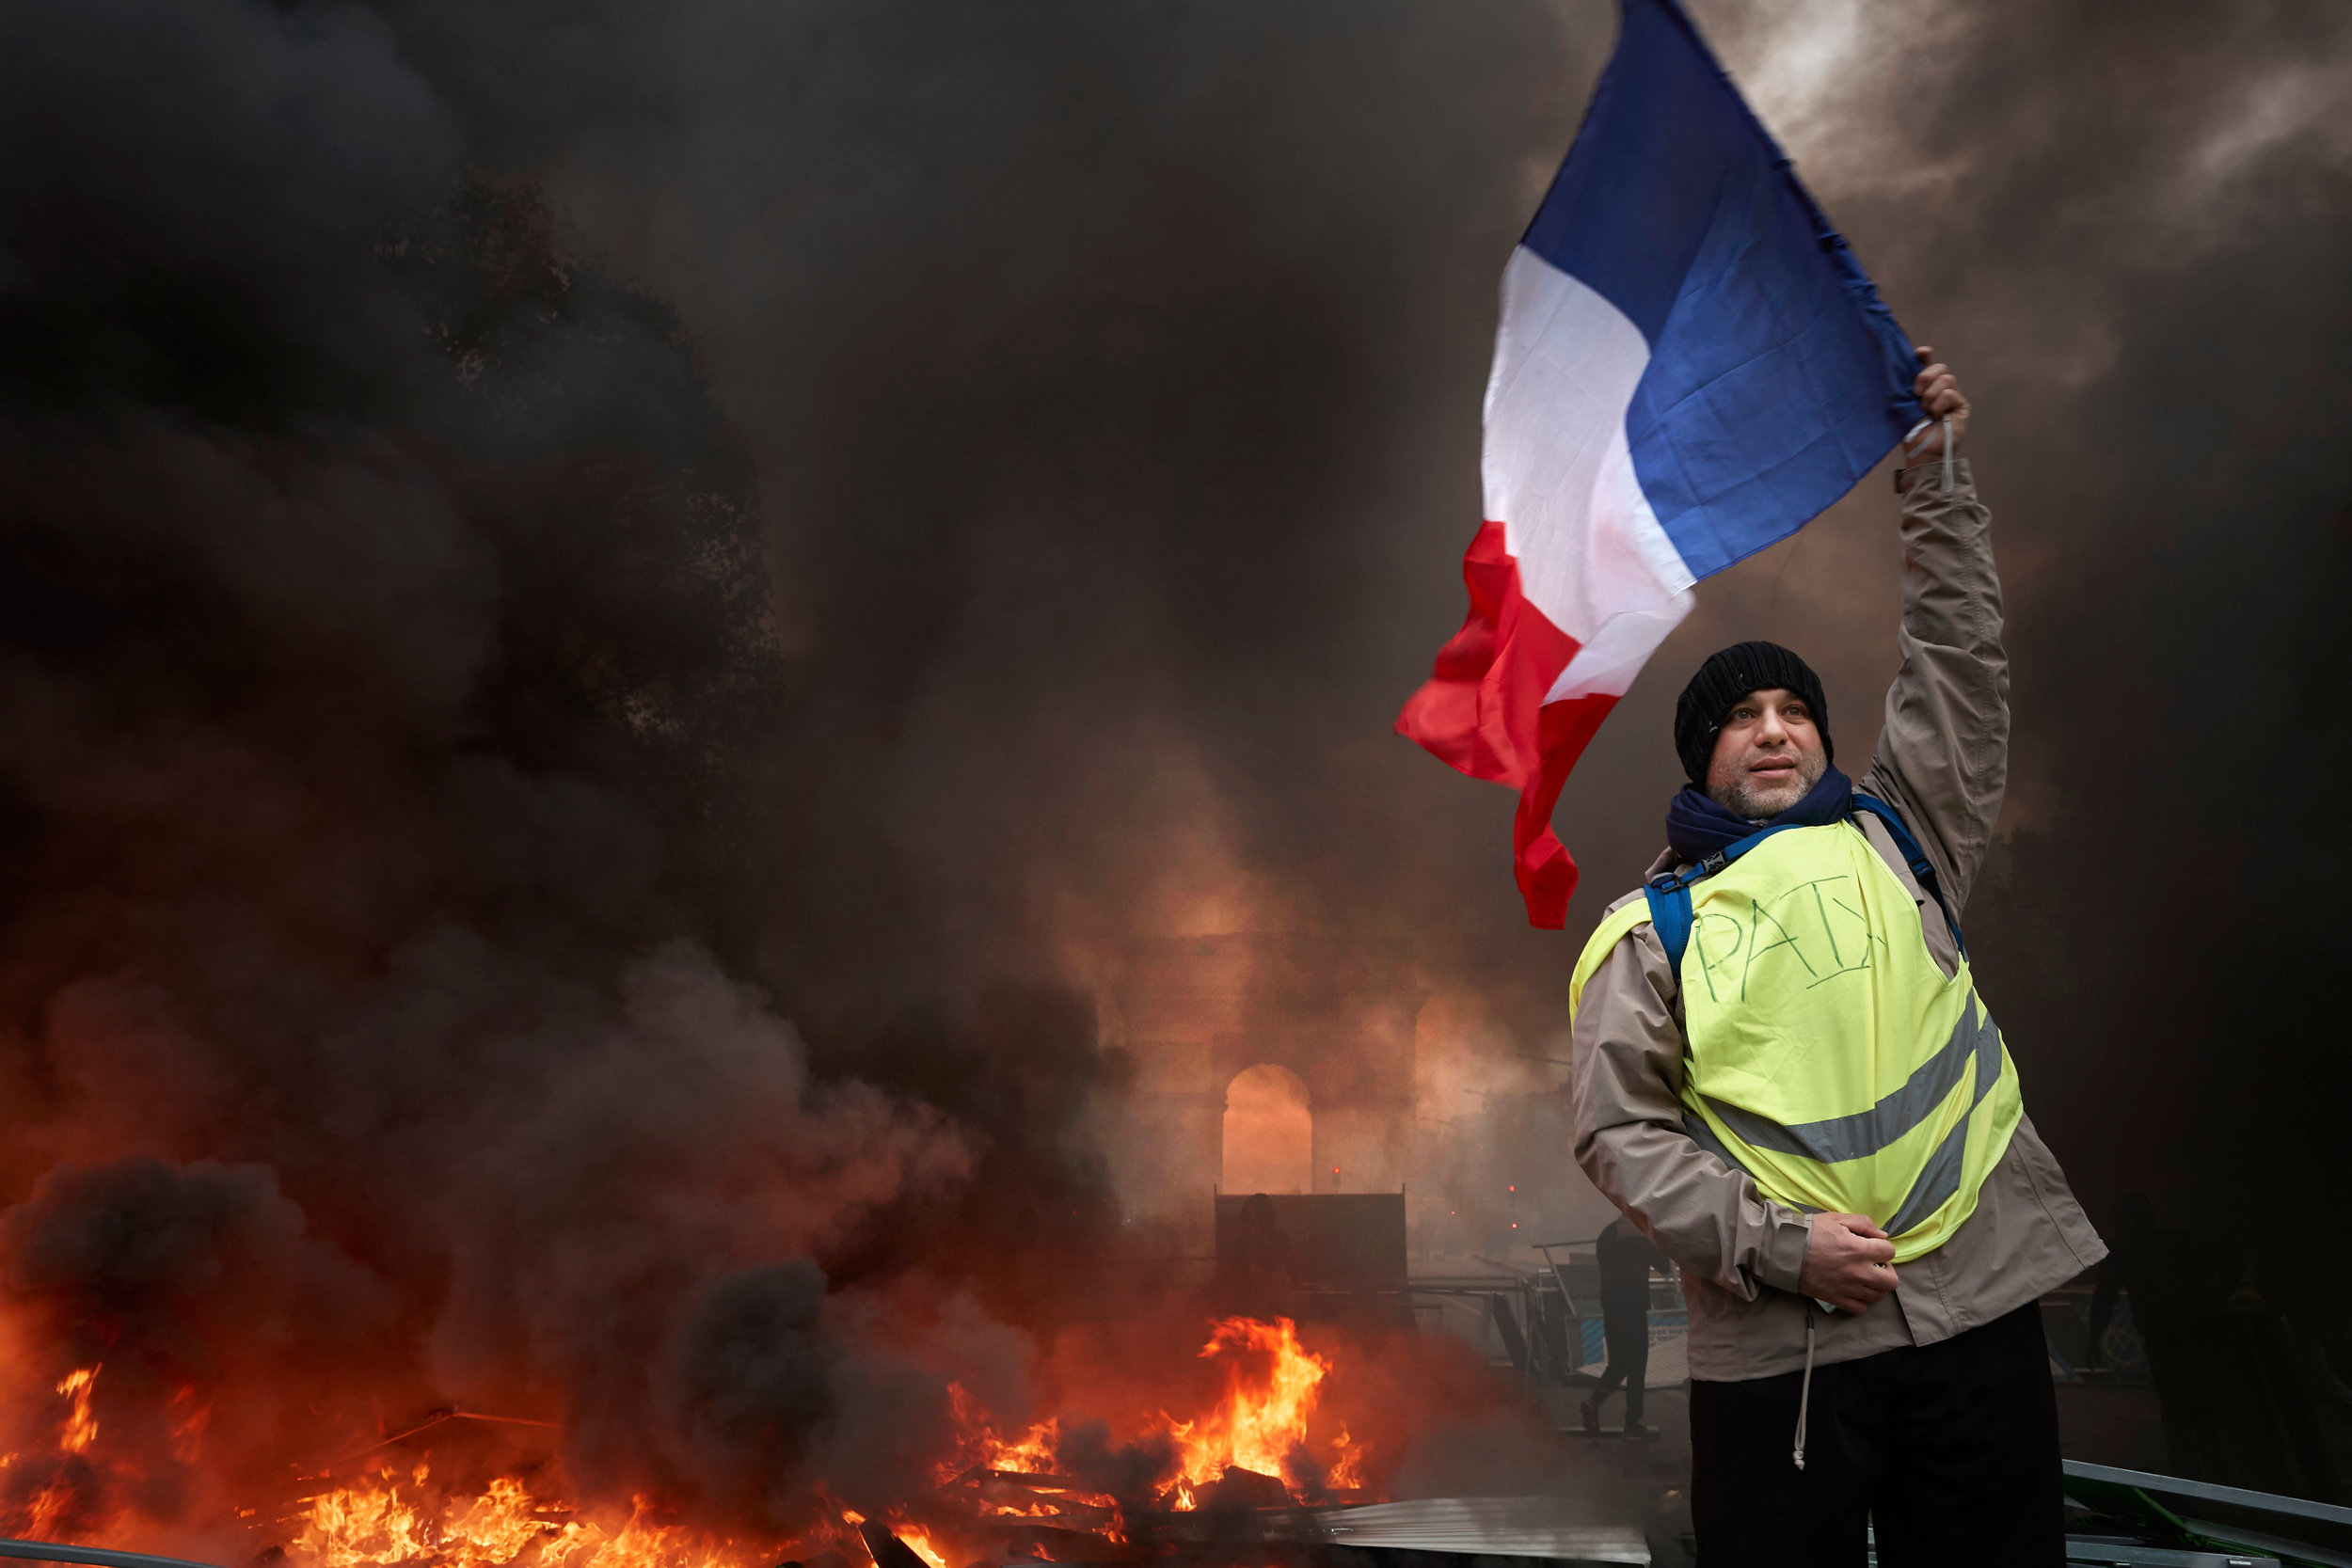  A Gilets Jaunes, or yellow vest, protestor waves the French Tricolour flag proudly, during demonstrations on the Champs Elysees in Paris as thousands turn out in the French capital to protest against the rising fuel and living costs implemented by P